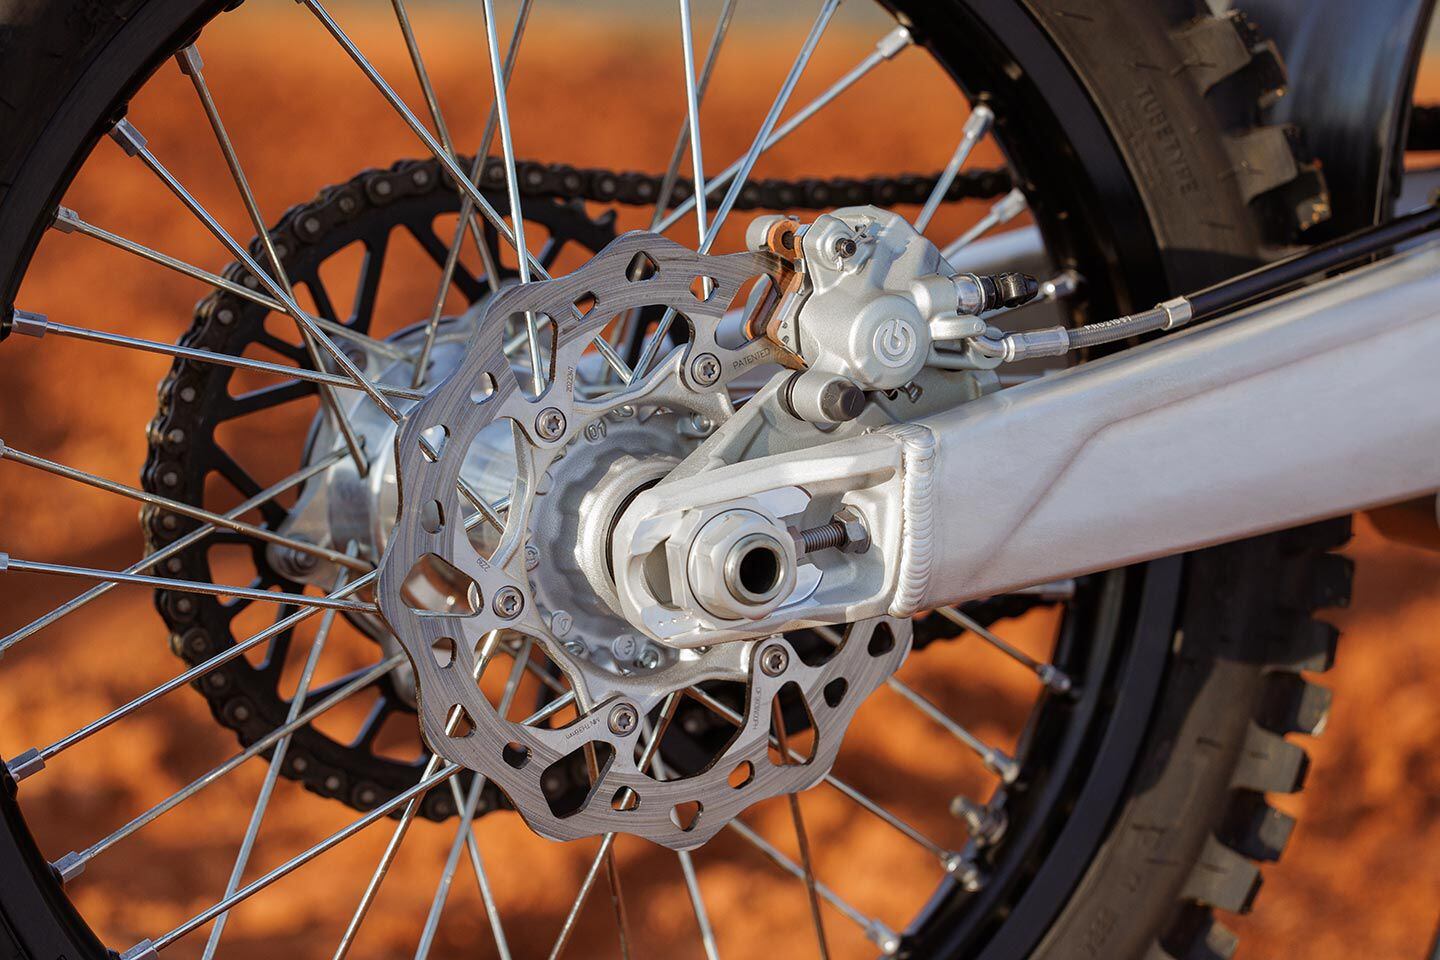 Brembo braking kit comes standard front and rear.